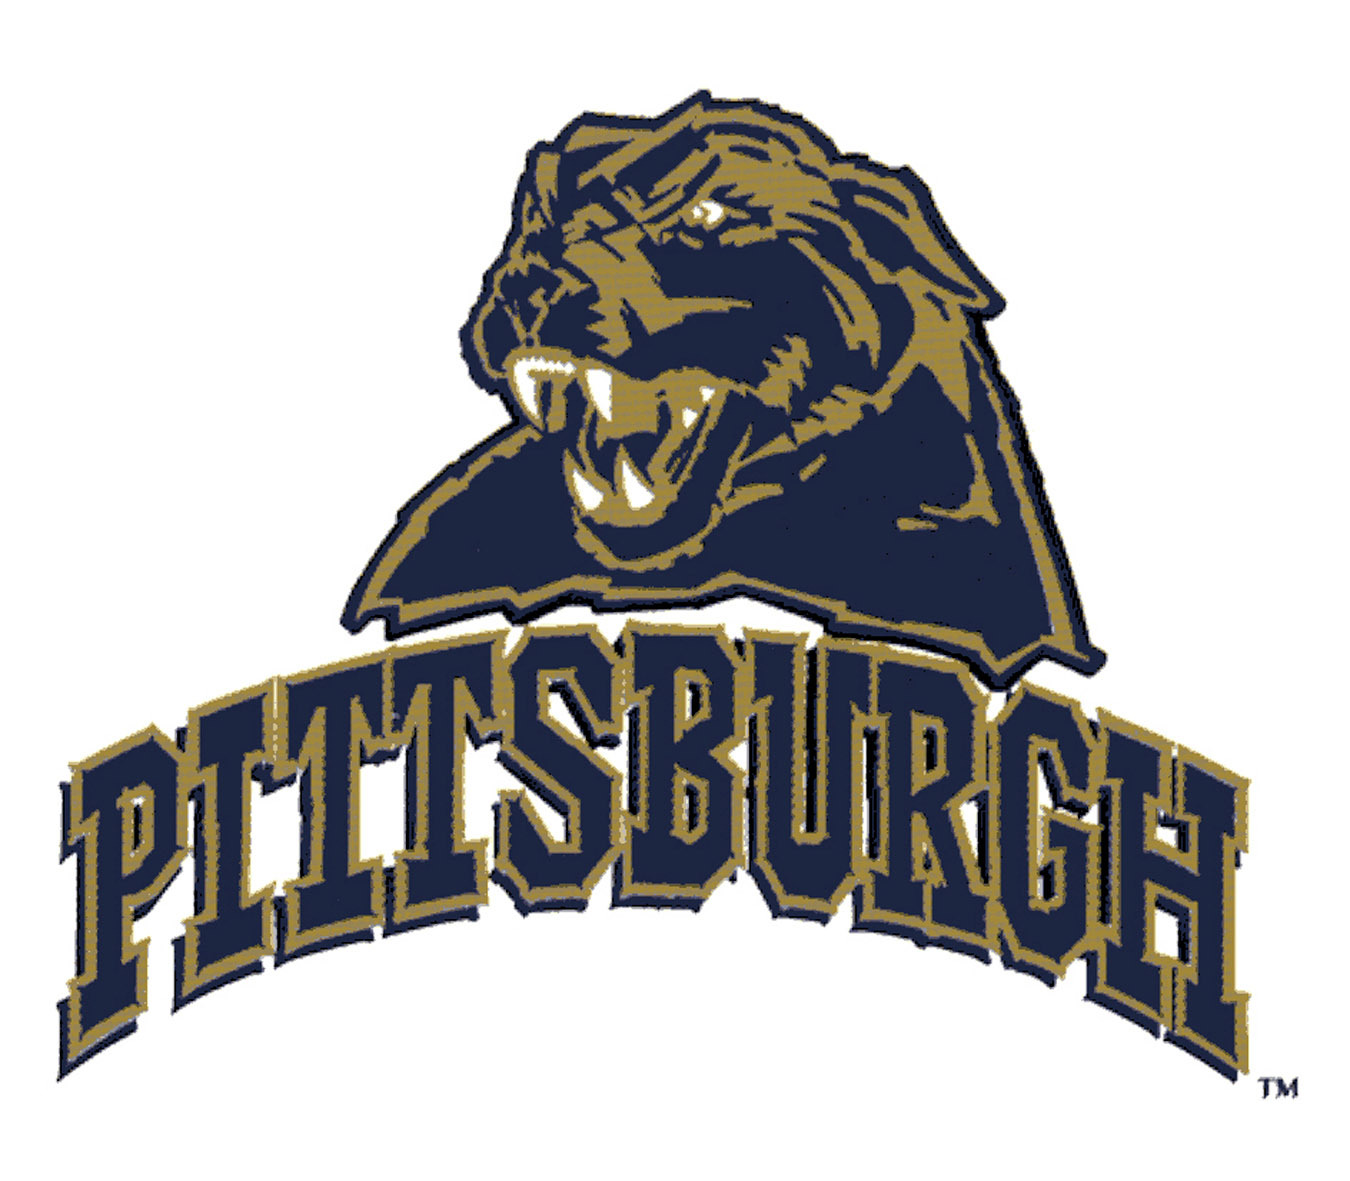 Pittsburghpanthers